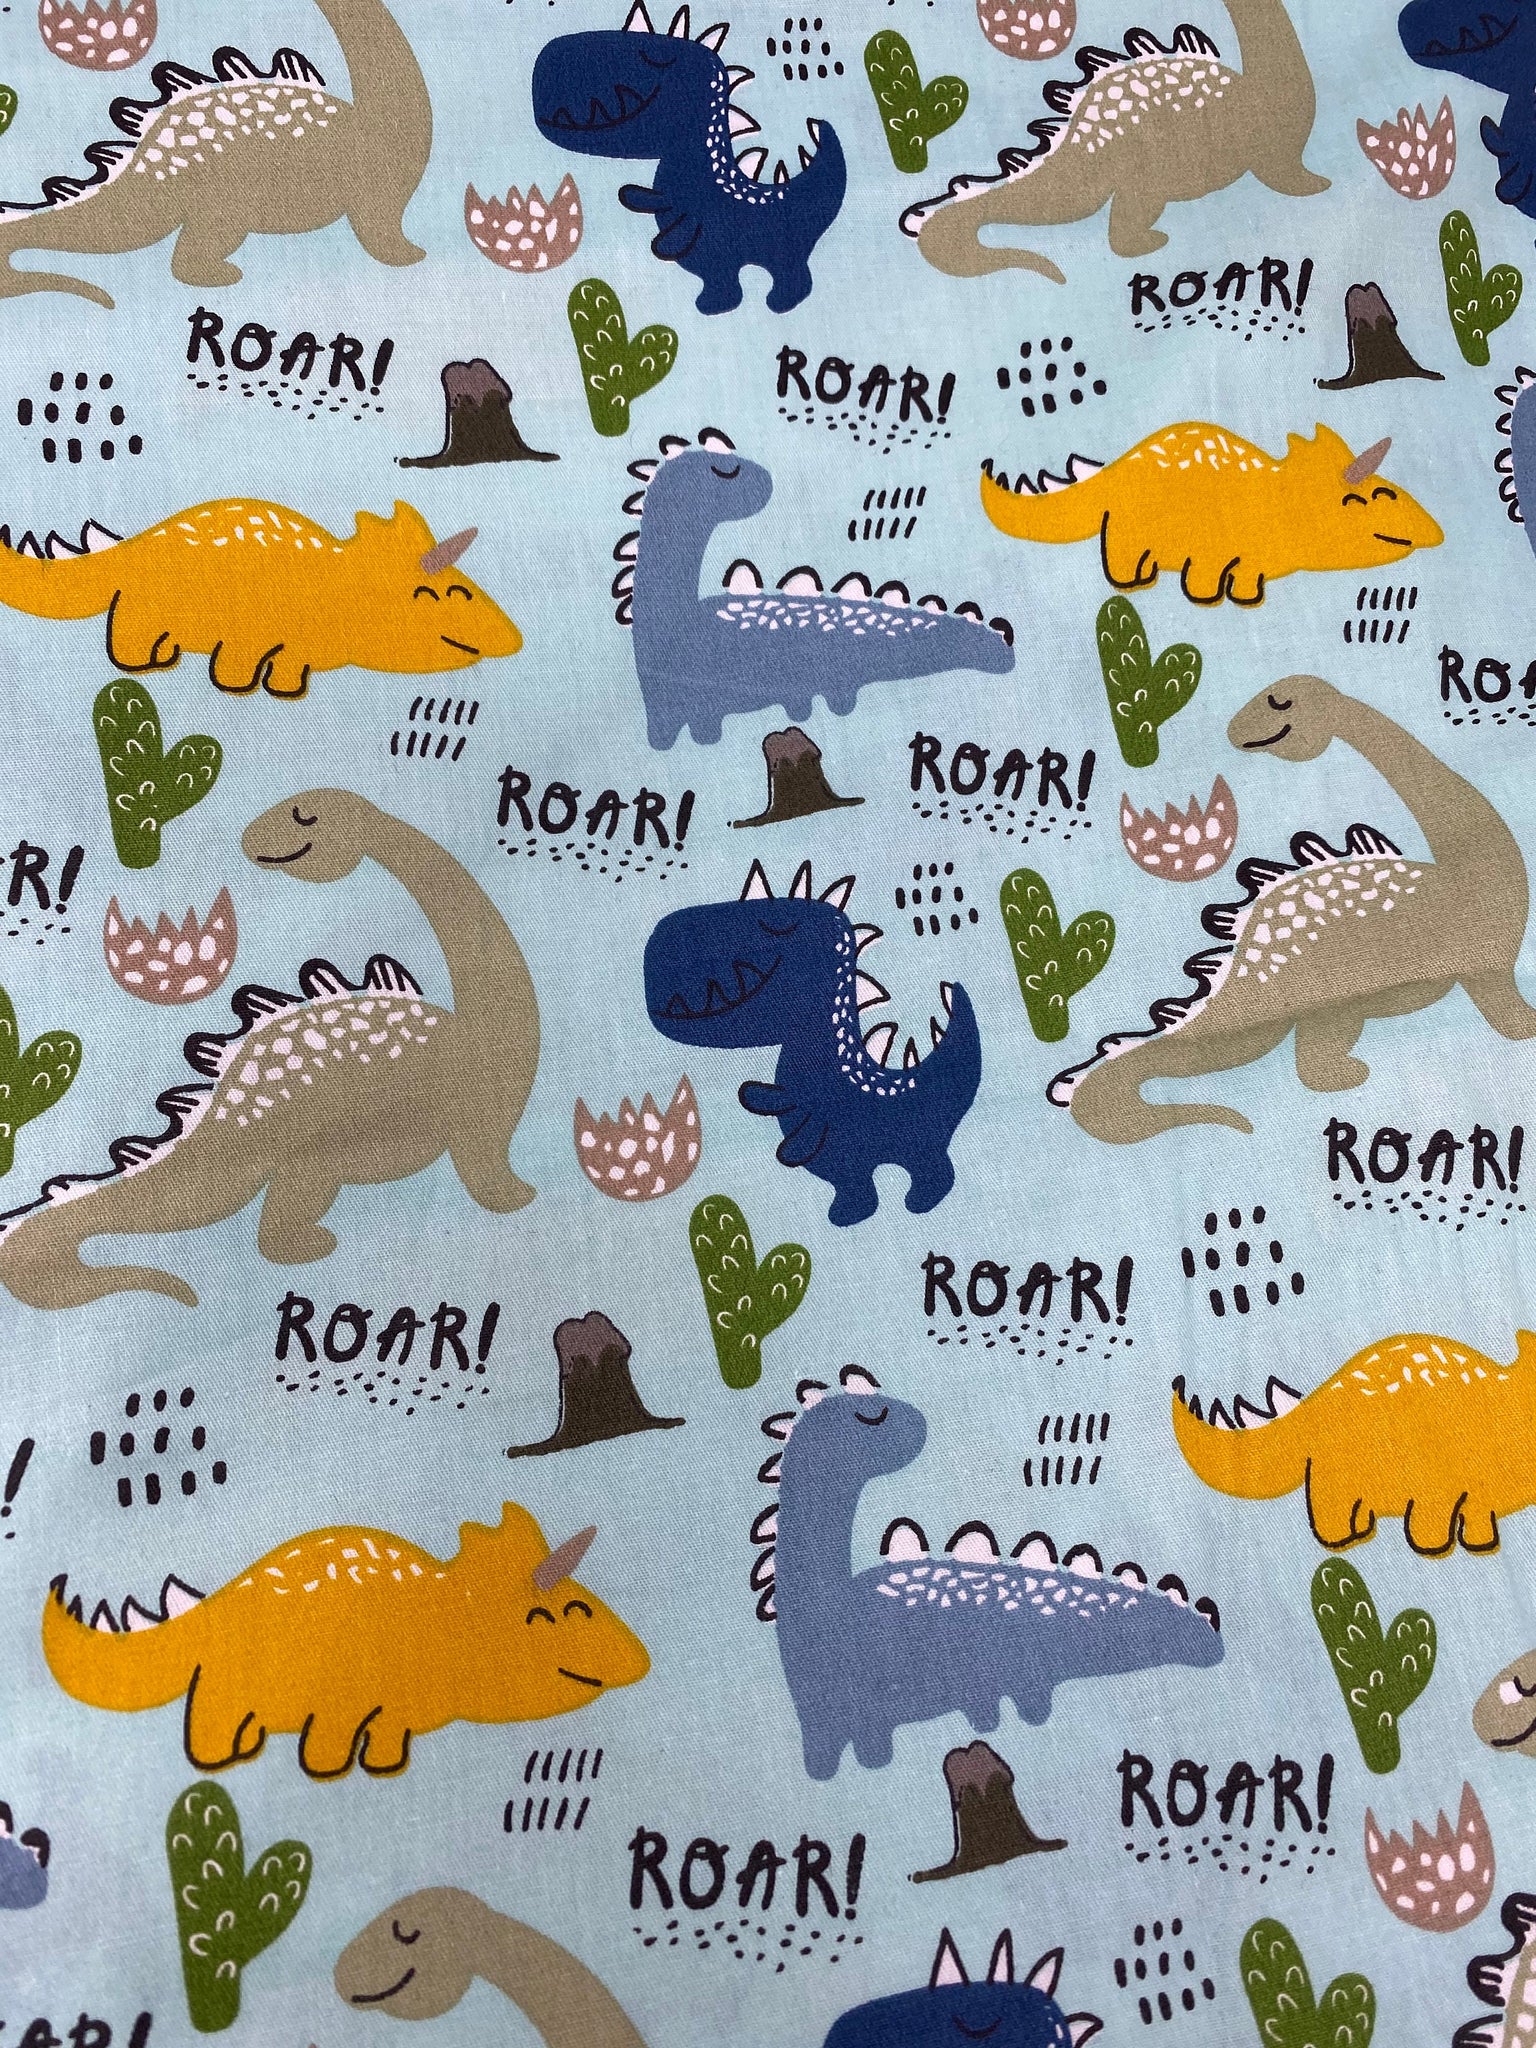 NEW, "Dinosaur ROAR", 100% Ribbed Cotton Fabric, Boutique Fabric, Custom Made Kids Fabric for Masks, Accessories, Bedding & More, 1 Yard